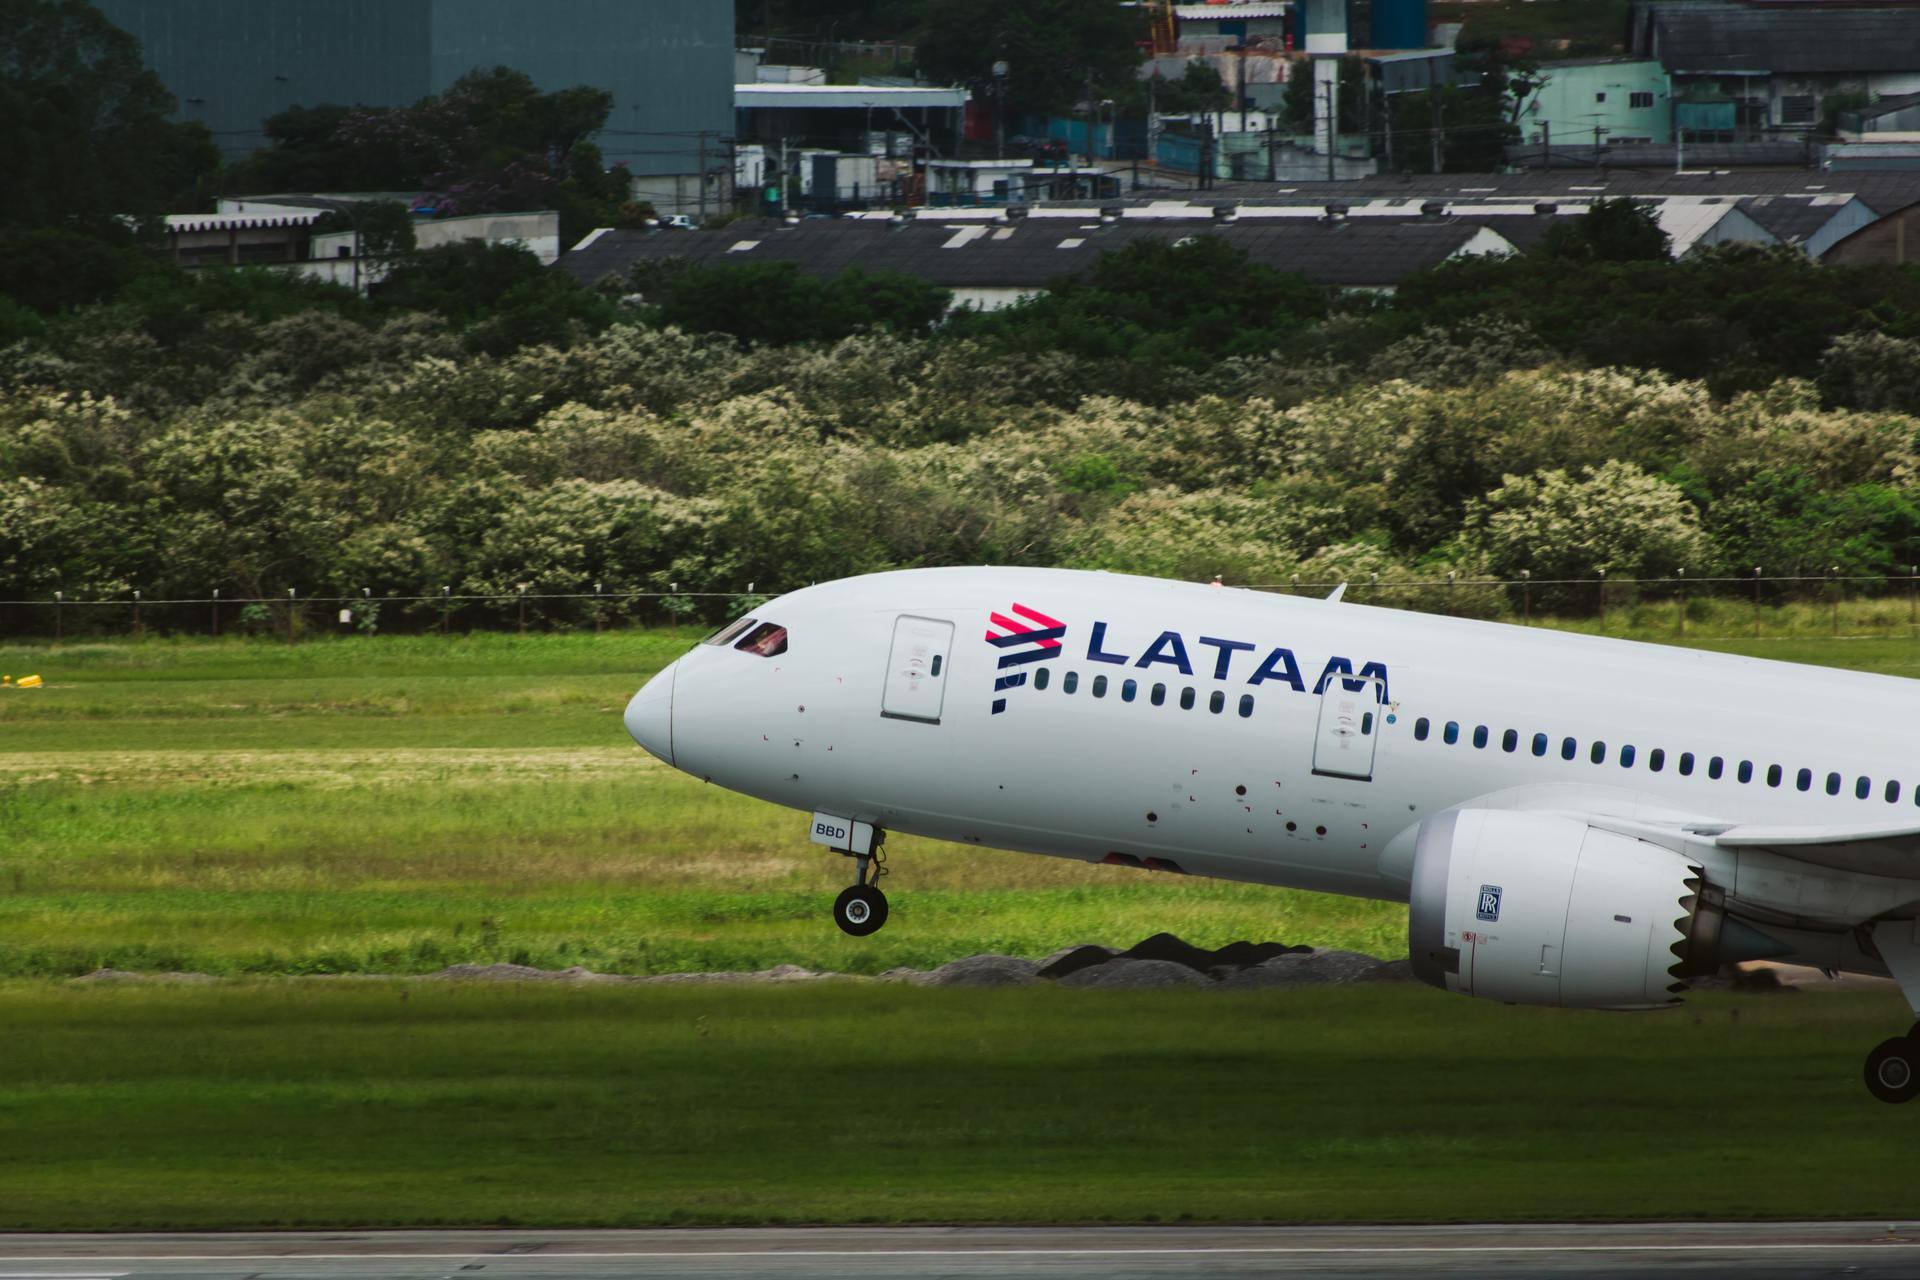 Latam horror flight: Some victims offered a ‘few thousand’ dollars, says lawyer